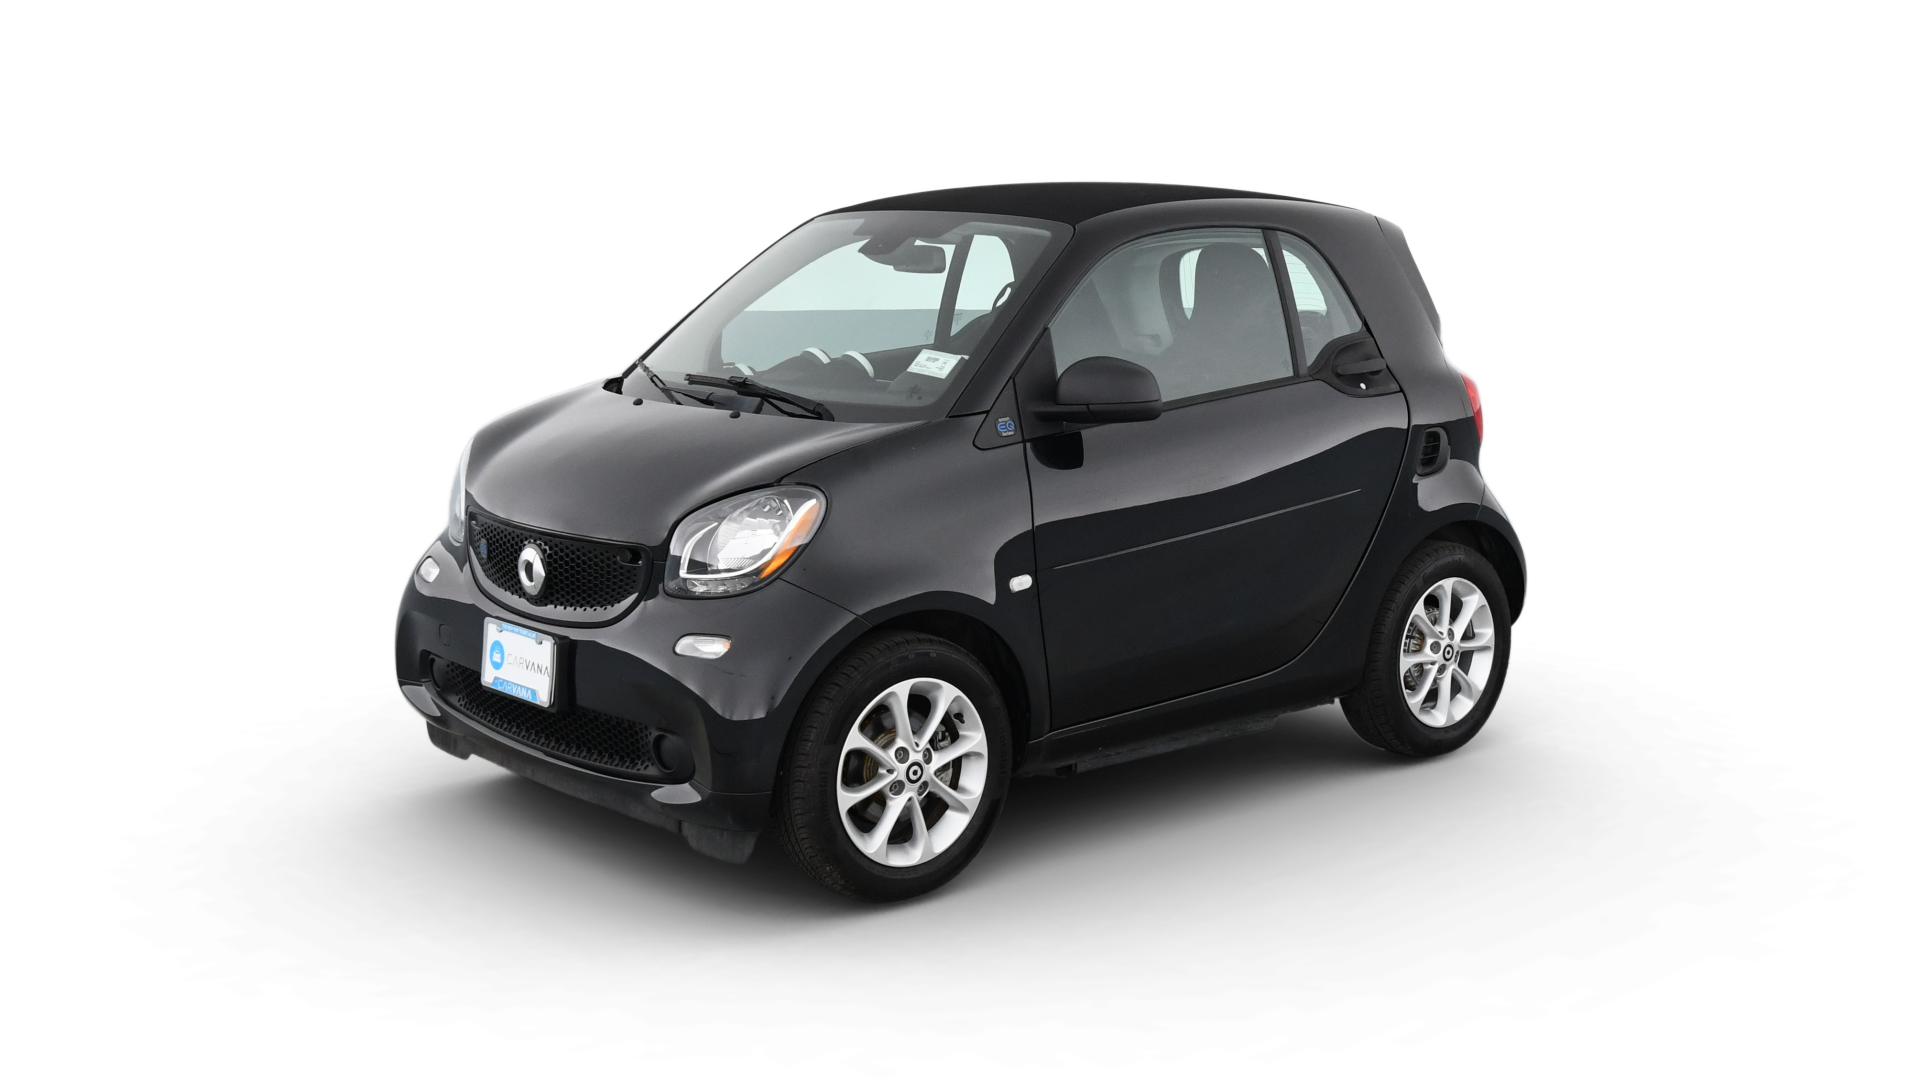 smart fortwo EQ coupe model image.